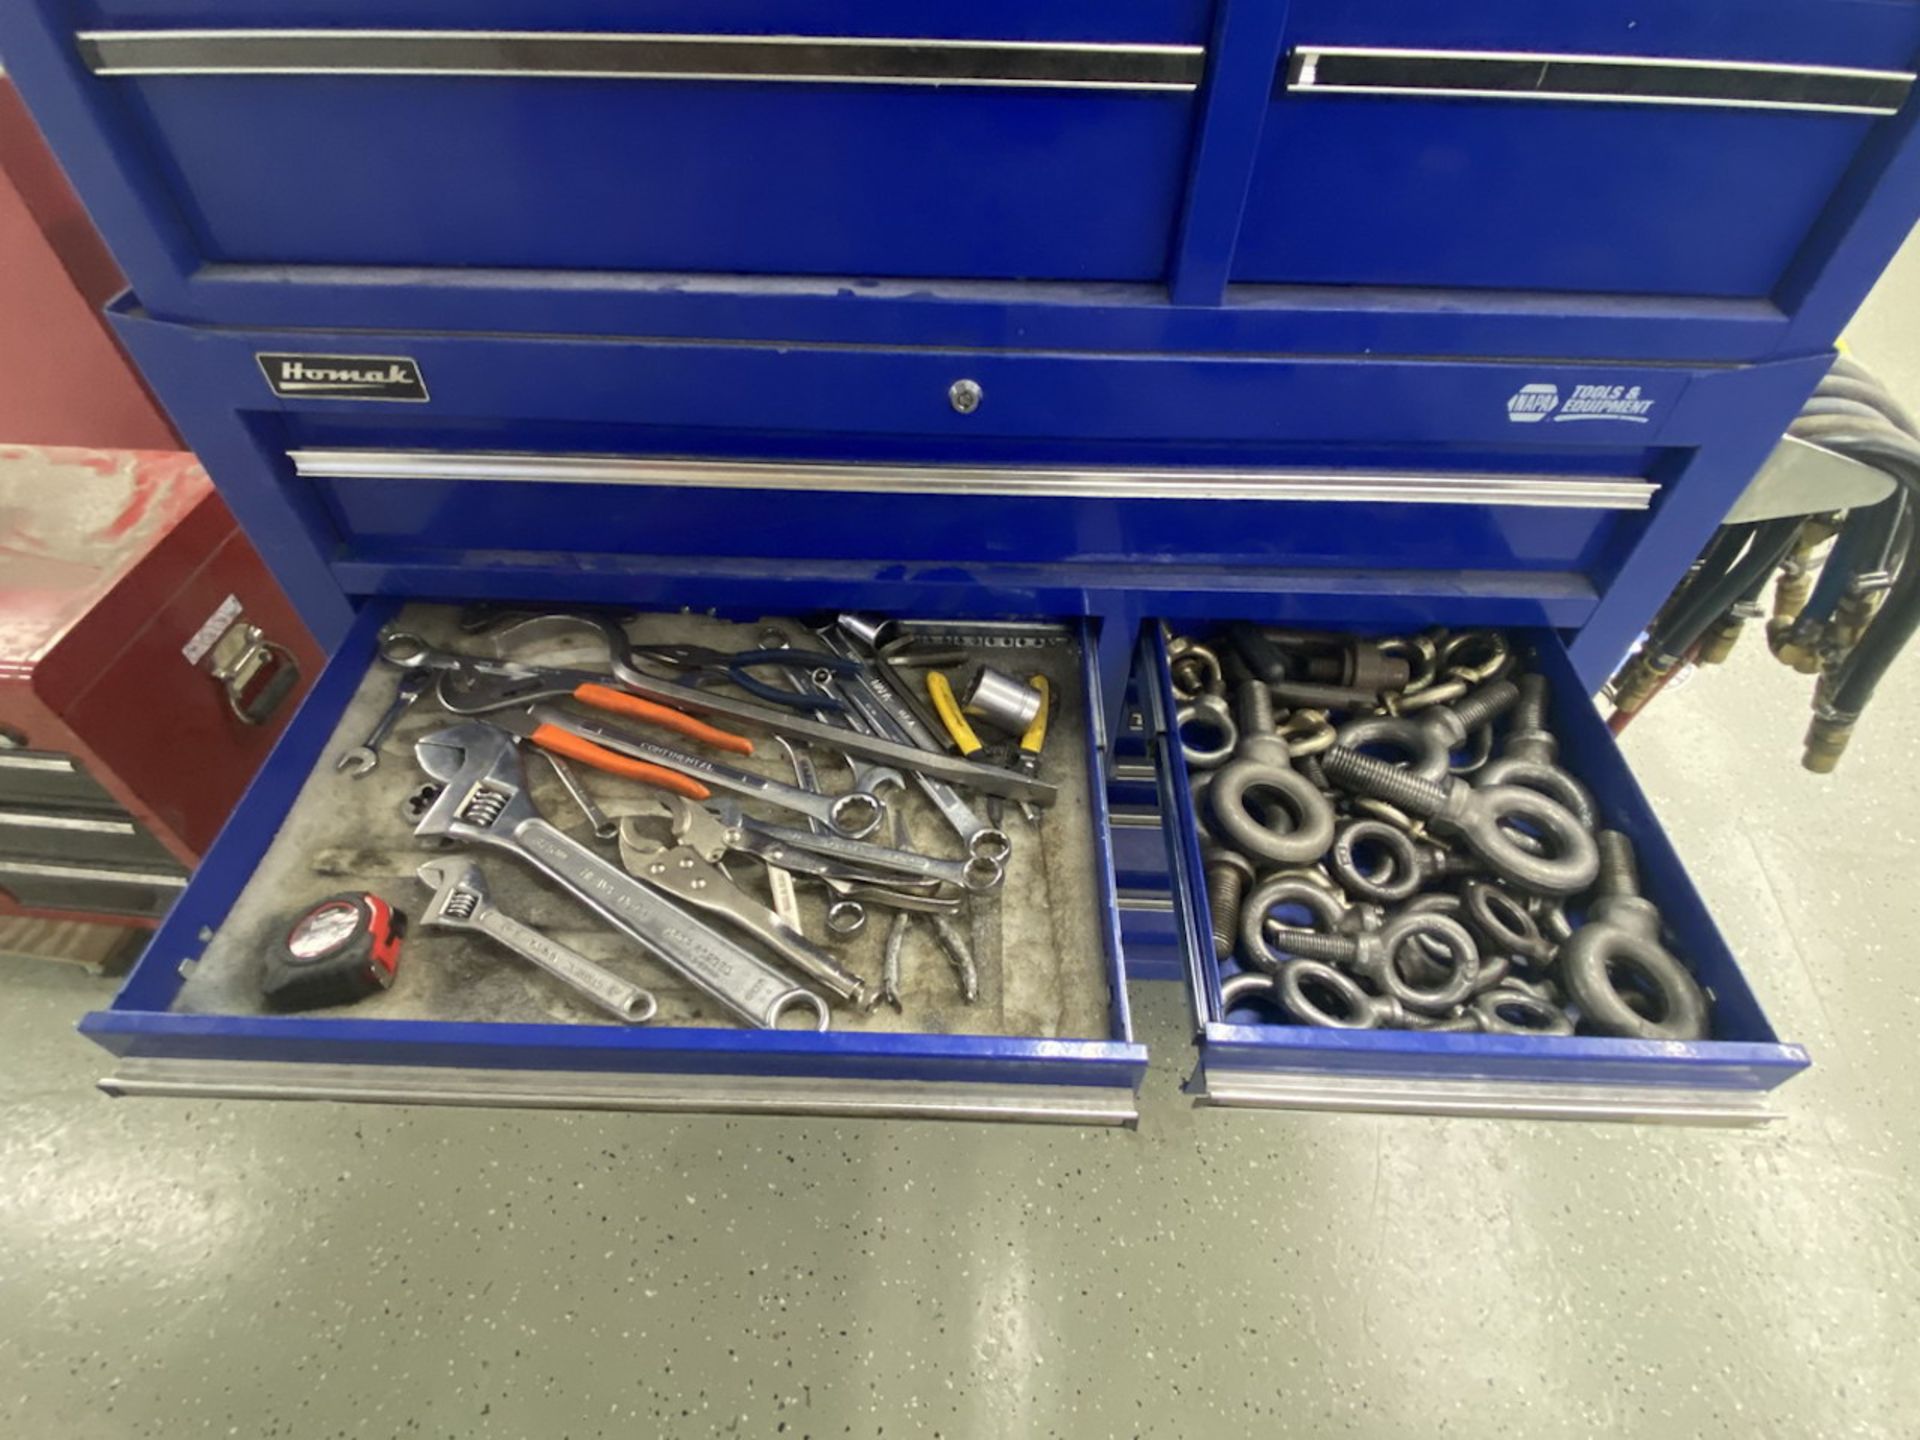 Homak 42"x 18" Tool Box & Contents Incl. Screwdrivers, Pliers, Eye Bolts, Air Hoses, Hose Fittings - Image 9 of 14